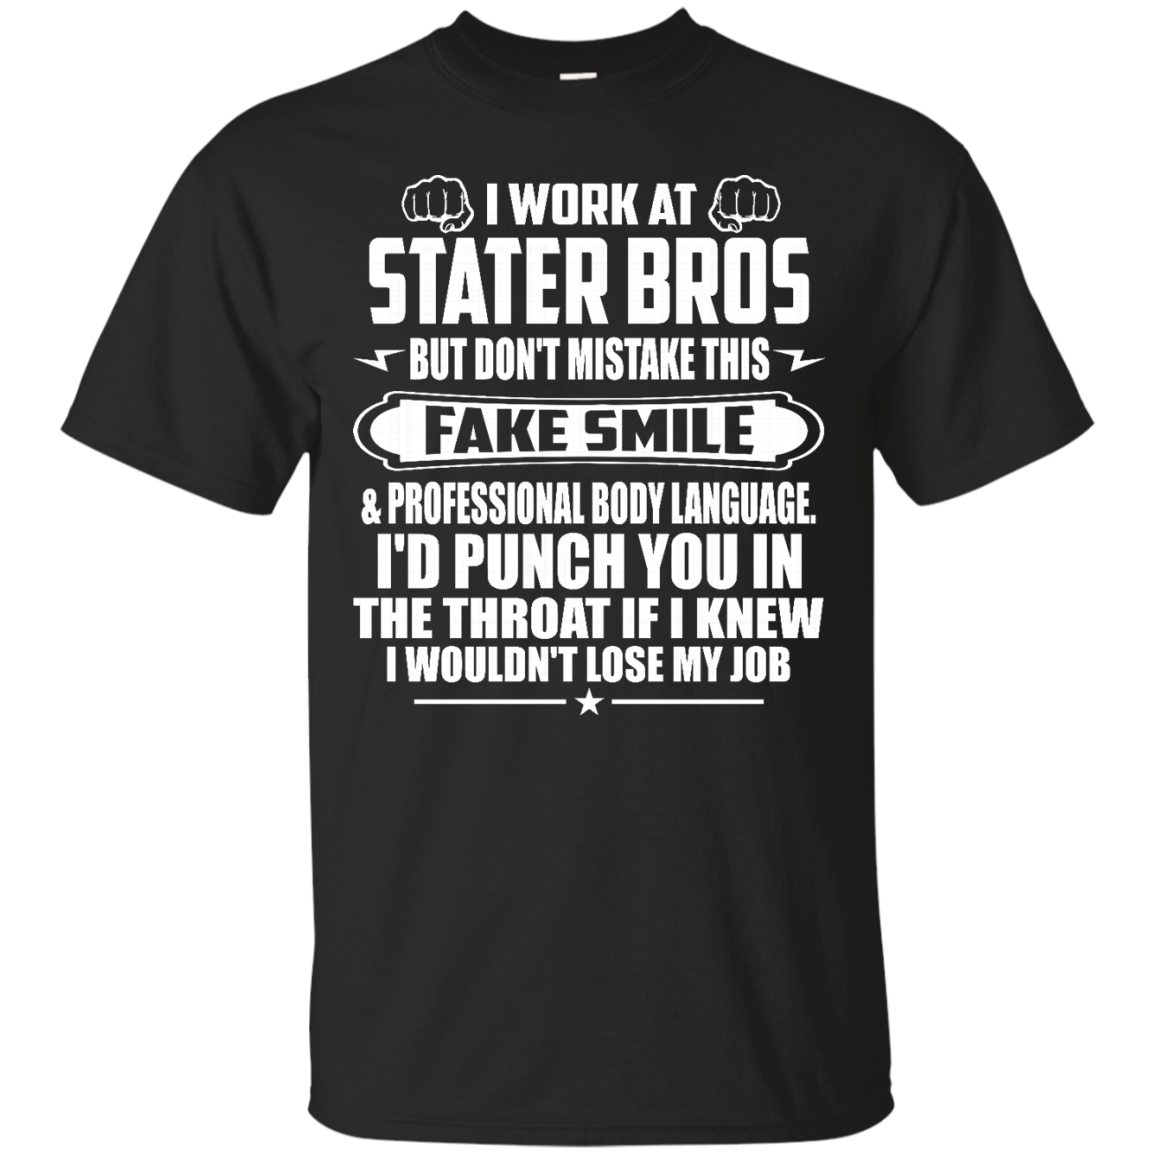 Stater Bros Worker Shirts I Work At Stater Bros - Amyna